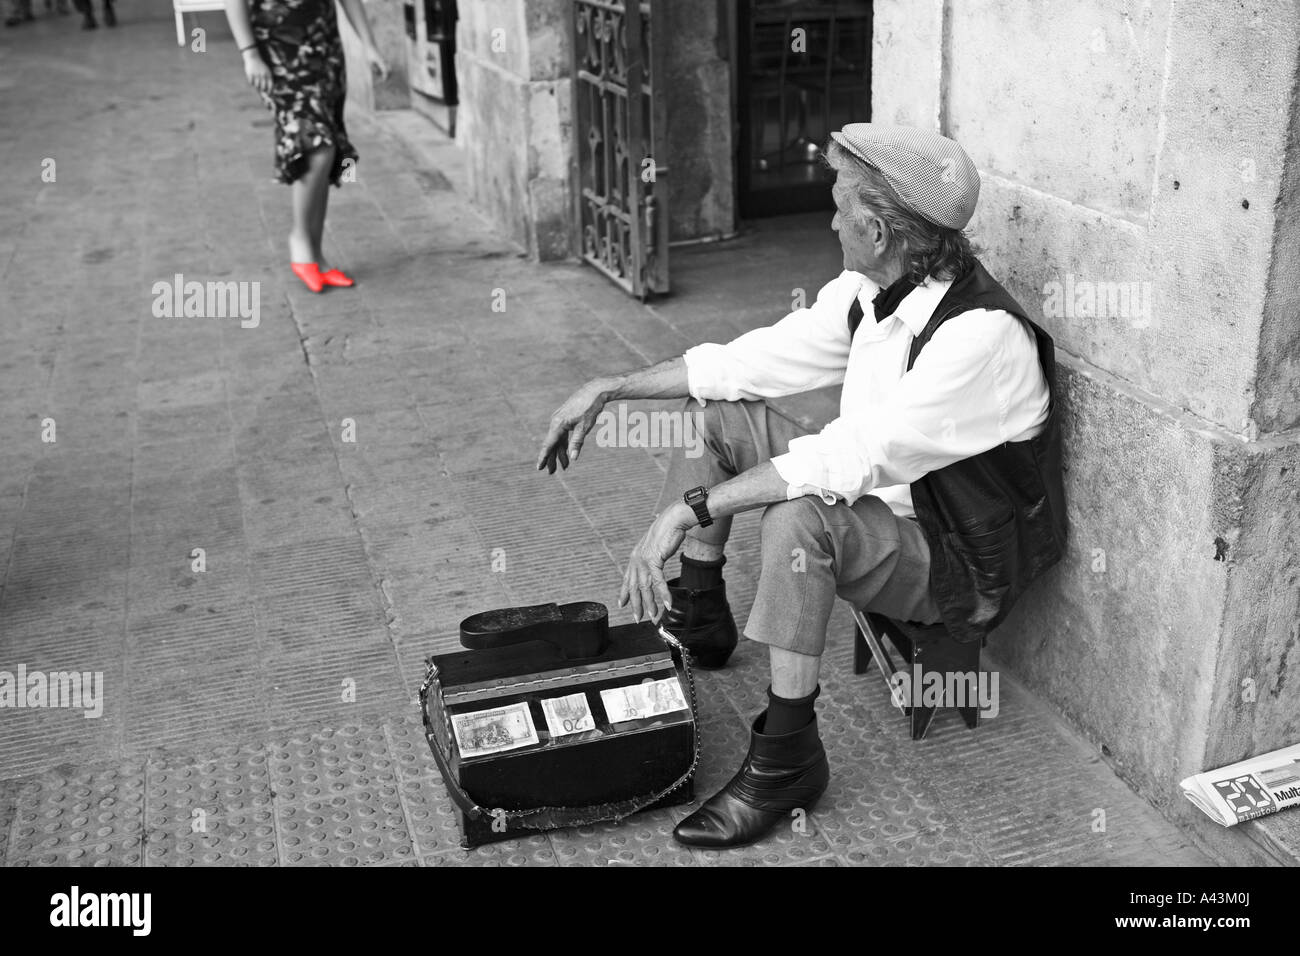 SPAIN  VALENCIA  SHOE SHINER LOOKING FOR PROSPECTIVE CUSTOMERS Stock Photo